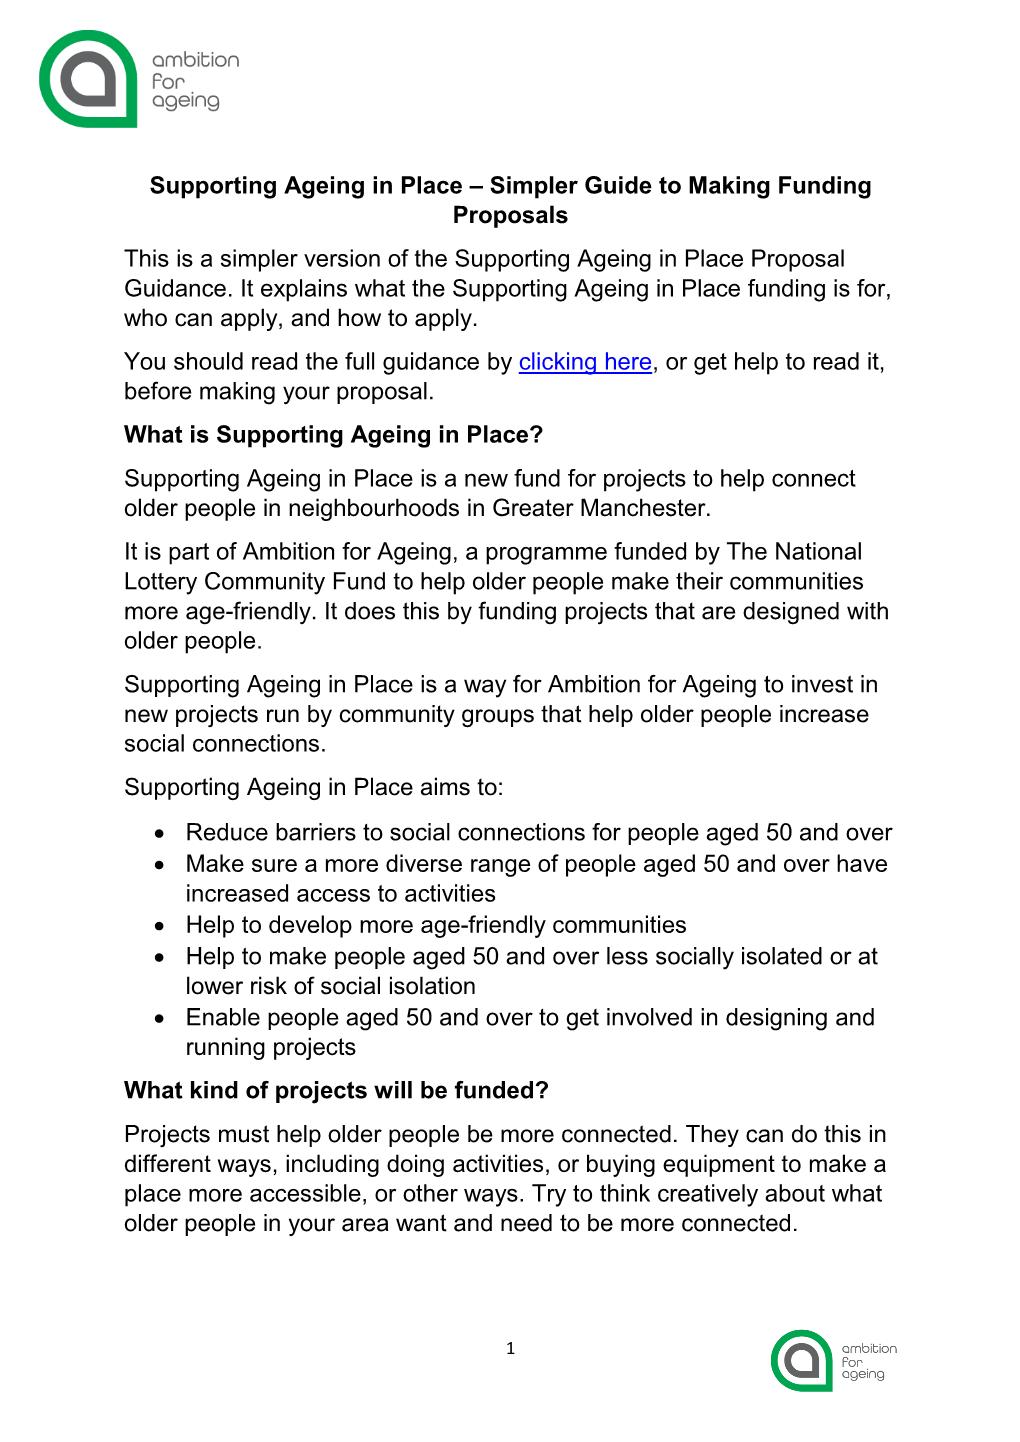 Accessible Proposal Guidance for Supporting Ageing in Place